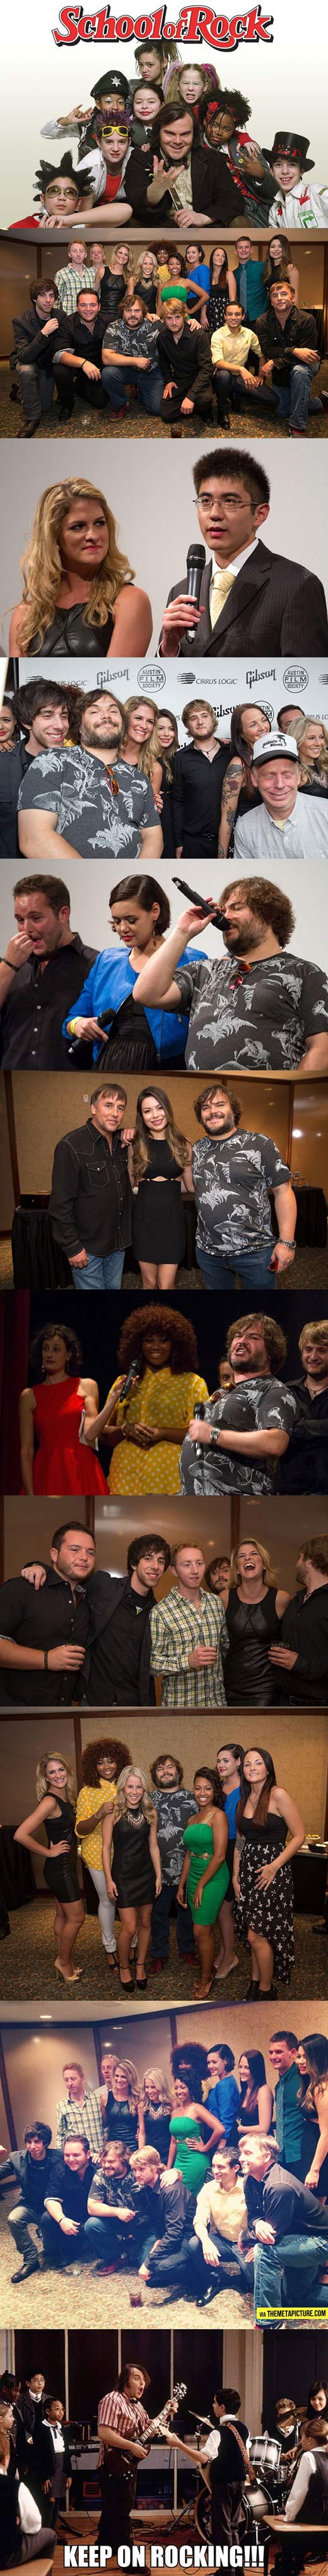 School Of Rock reunited 10 years later…